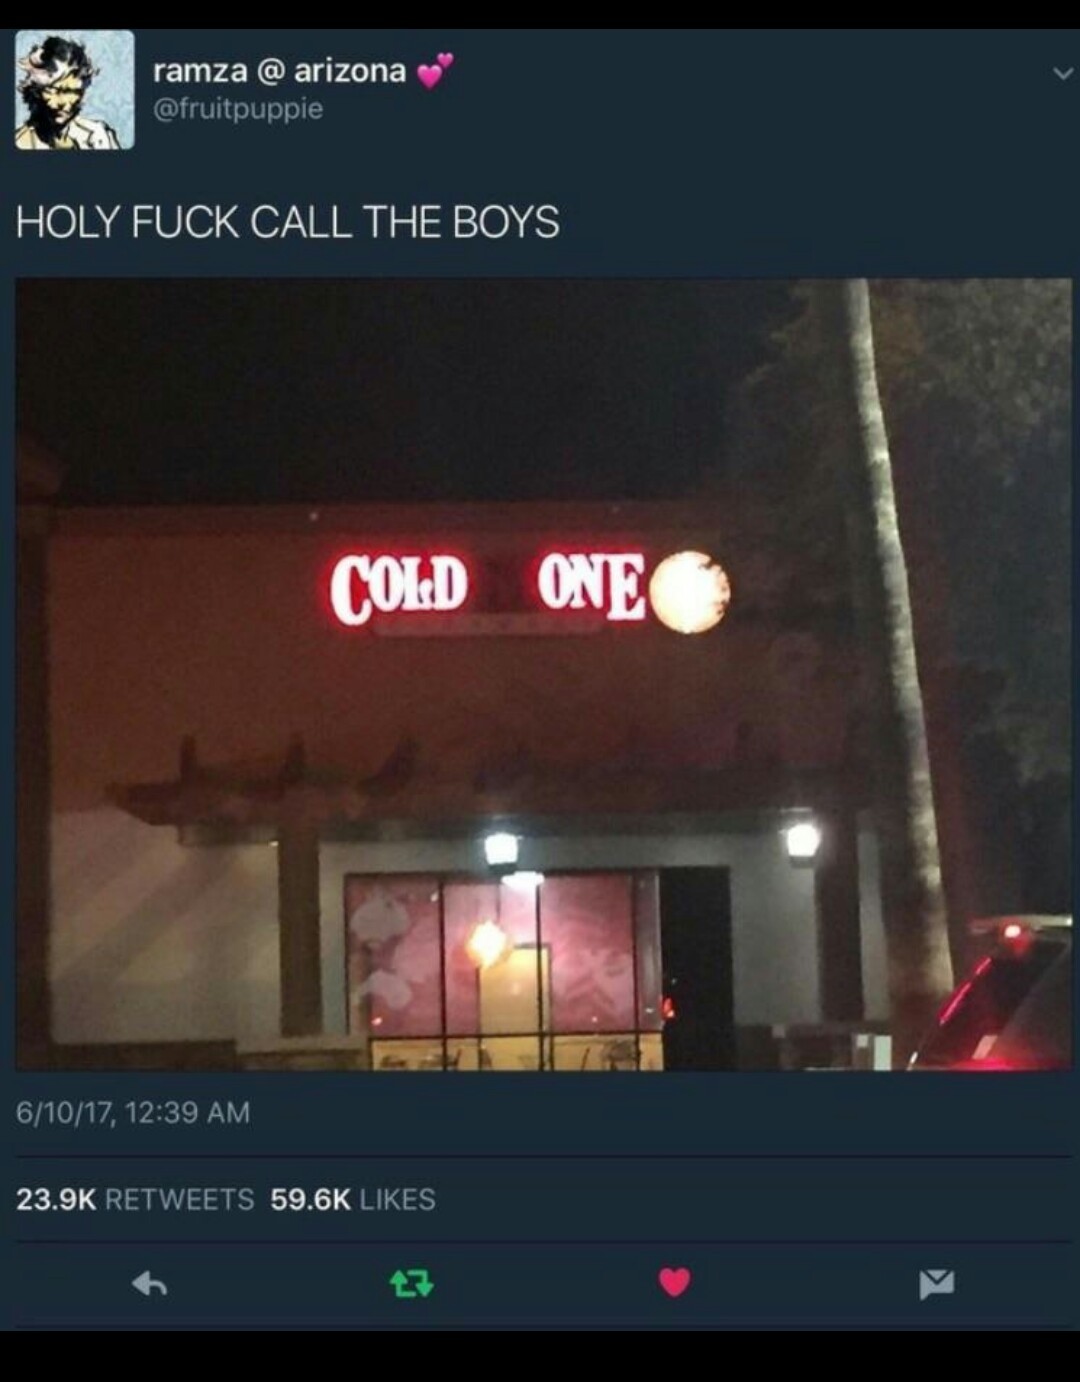 "Let's open a restaurant with the boys" - meme